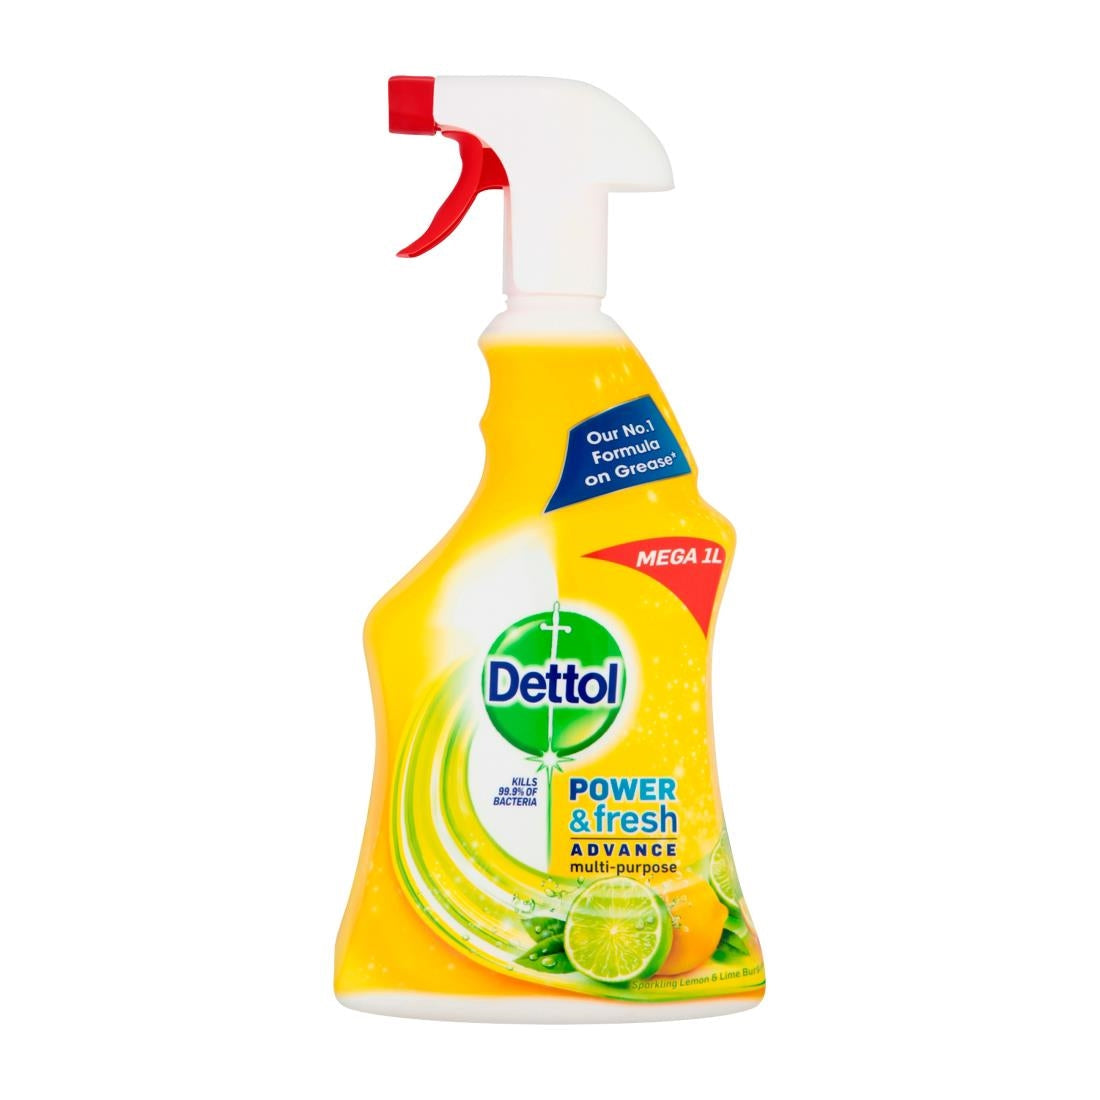 FT018 Dettol Power and Fresh Advance Multi-Purpose Cleaner Ready To Use 1Ltr JD Catering Equipment Solutions Ltd